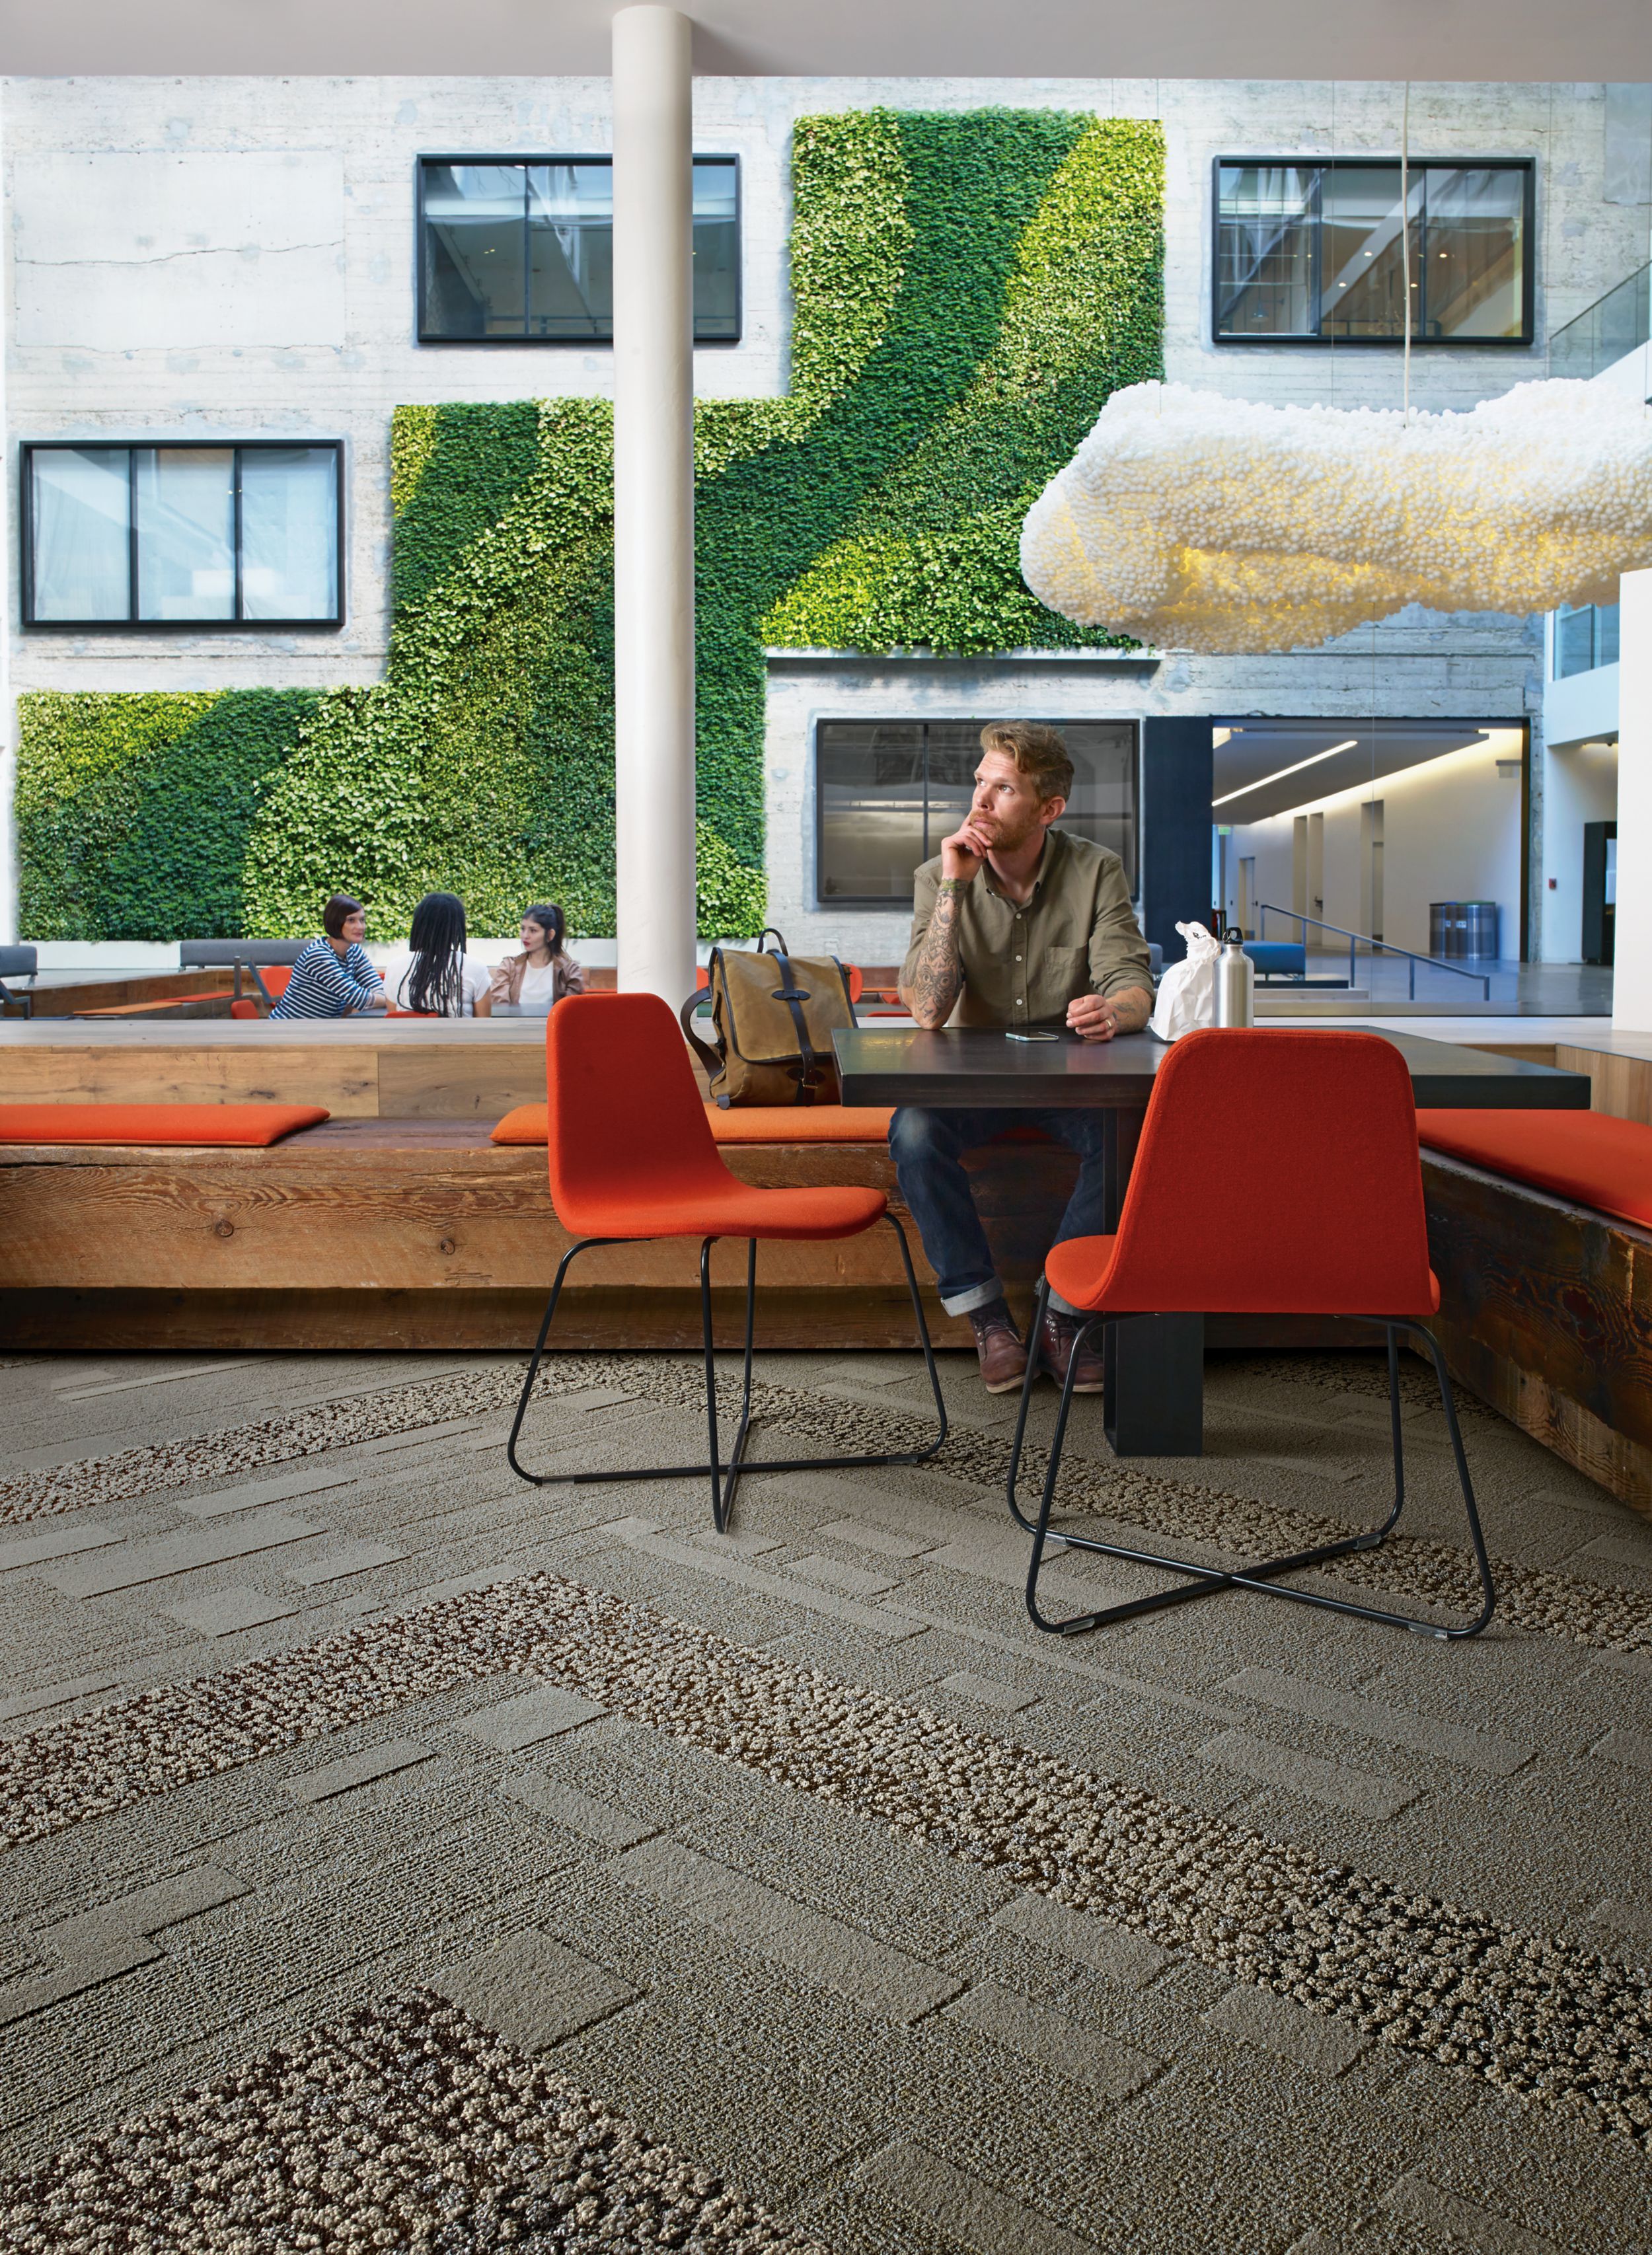 Interface EM552 plank carpet tile with man sitting at table with lunch and group meeting in front of vine wall in the background  afbeeldingnummer 3